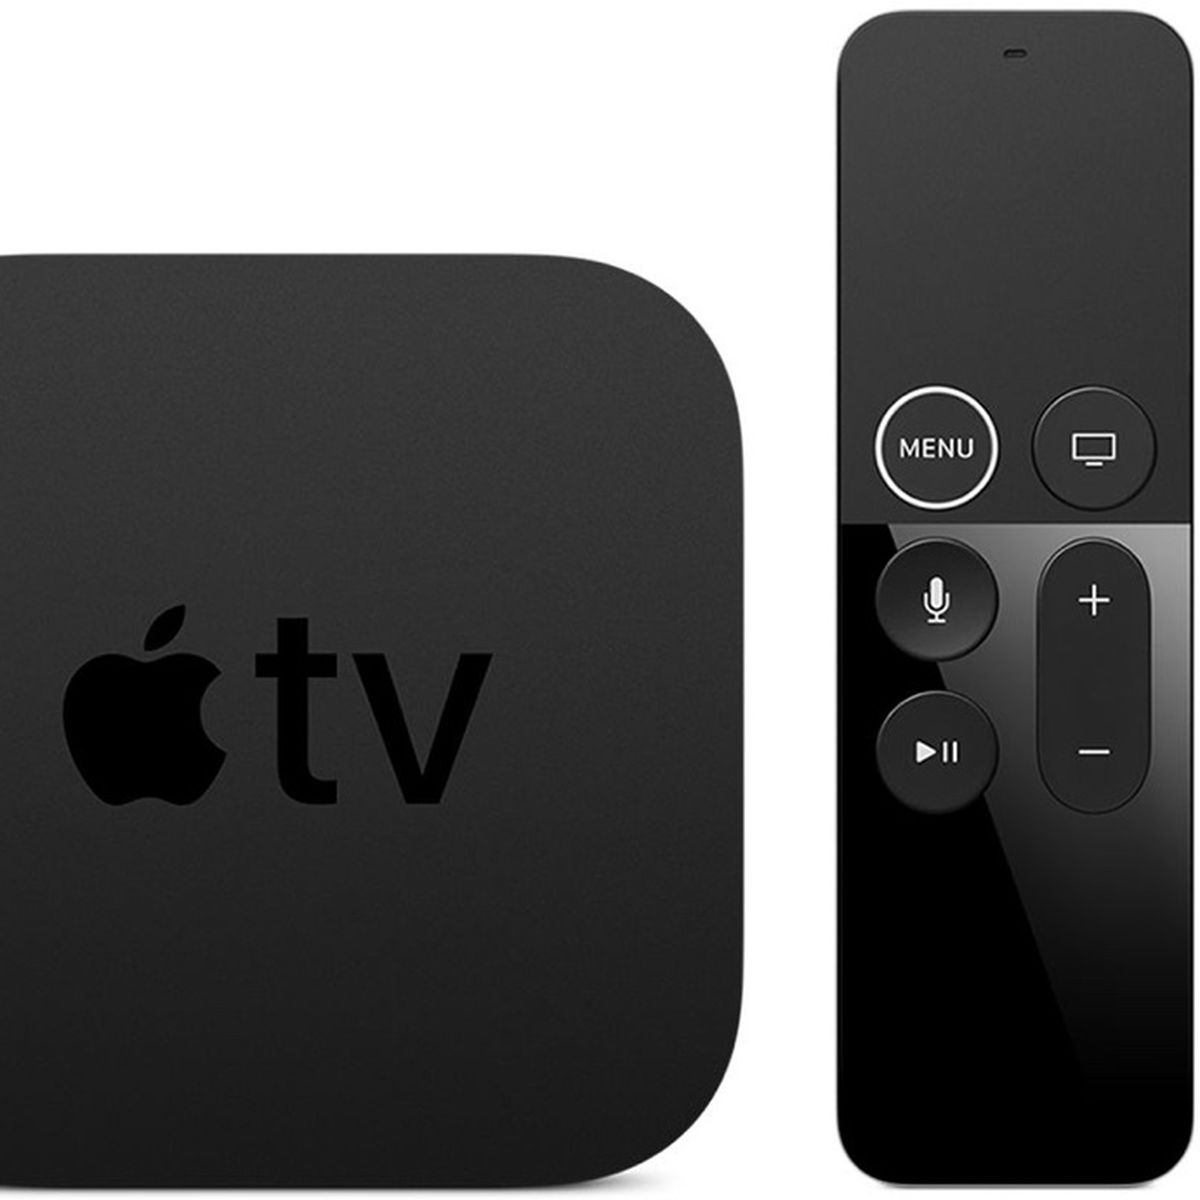 Nikkei: Apple Working on New Apple TV for Release Next Year 